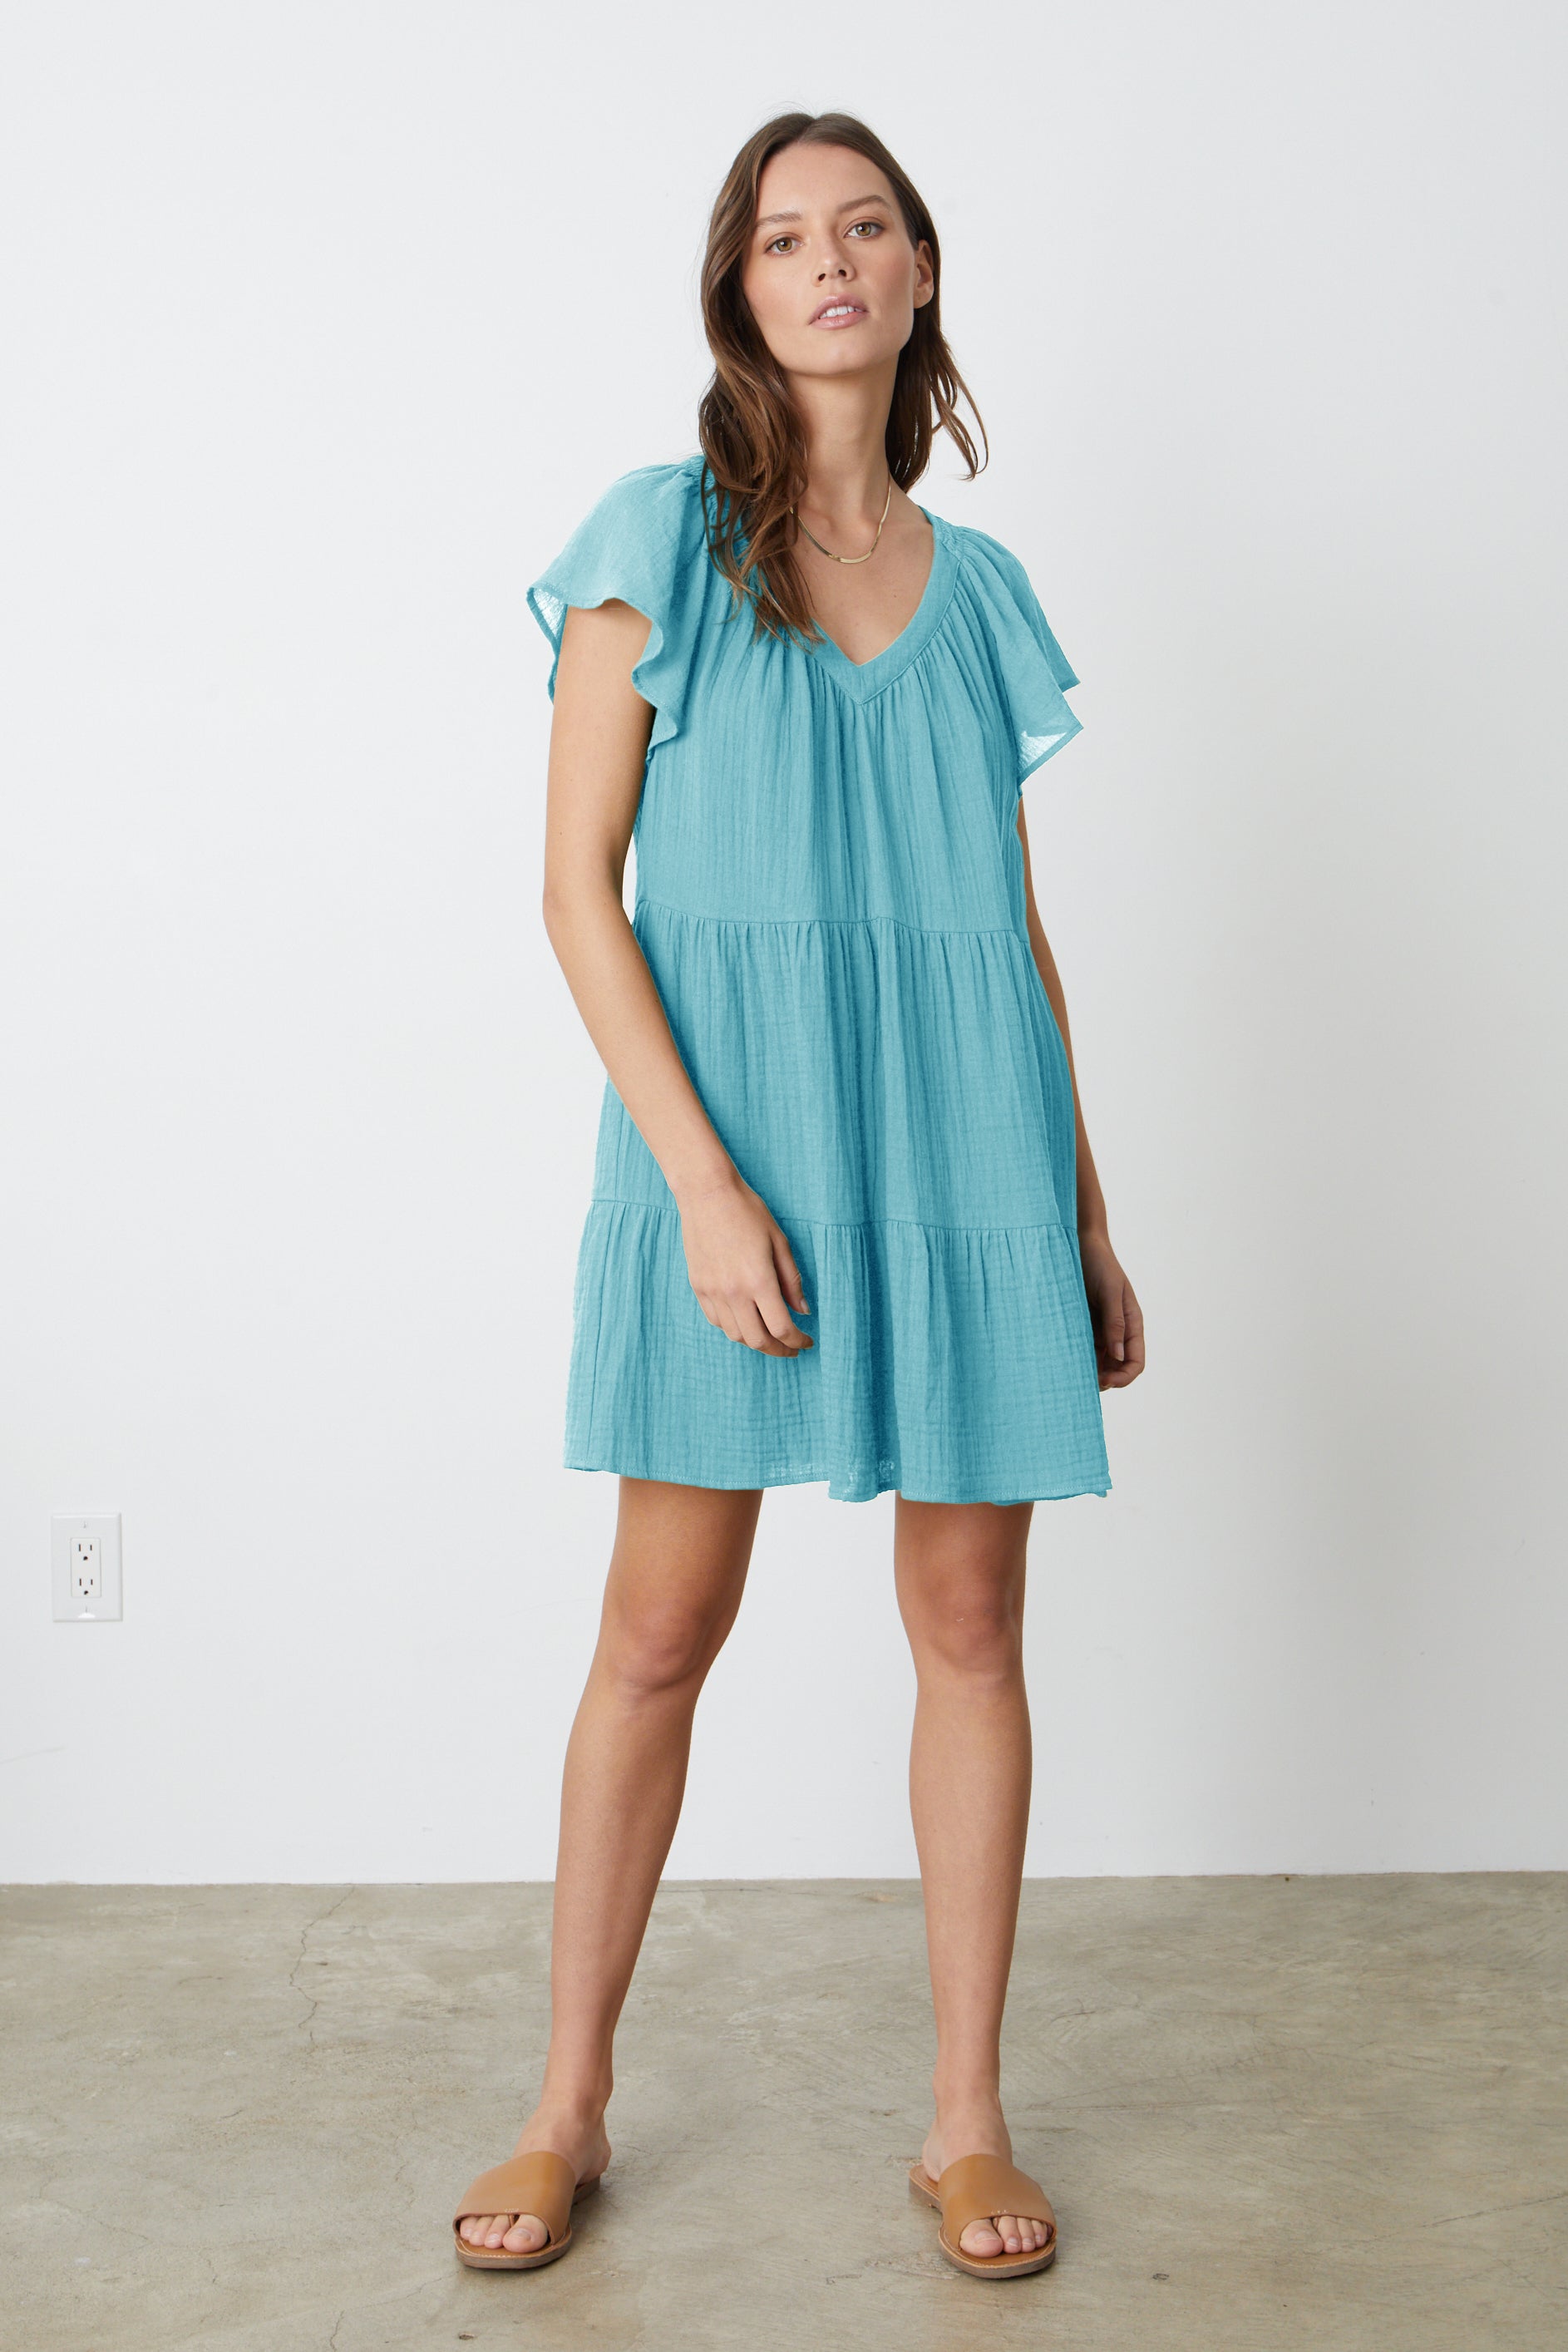   A model wearing a Velvet by Graham & Spencer ELEANOR COTTON GAUZE TIERED DRESS in aqua blue with sandals. 